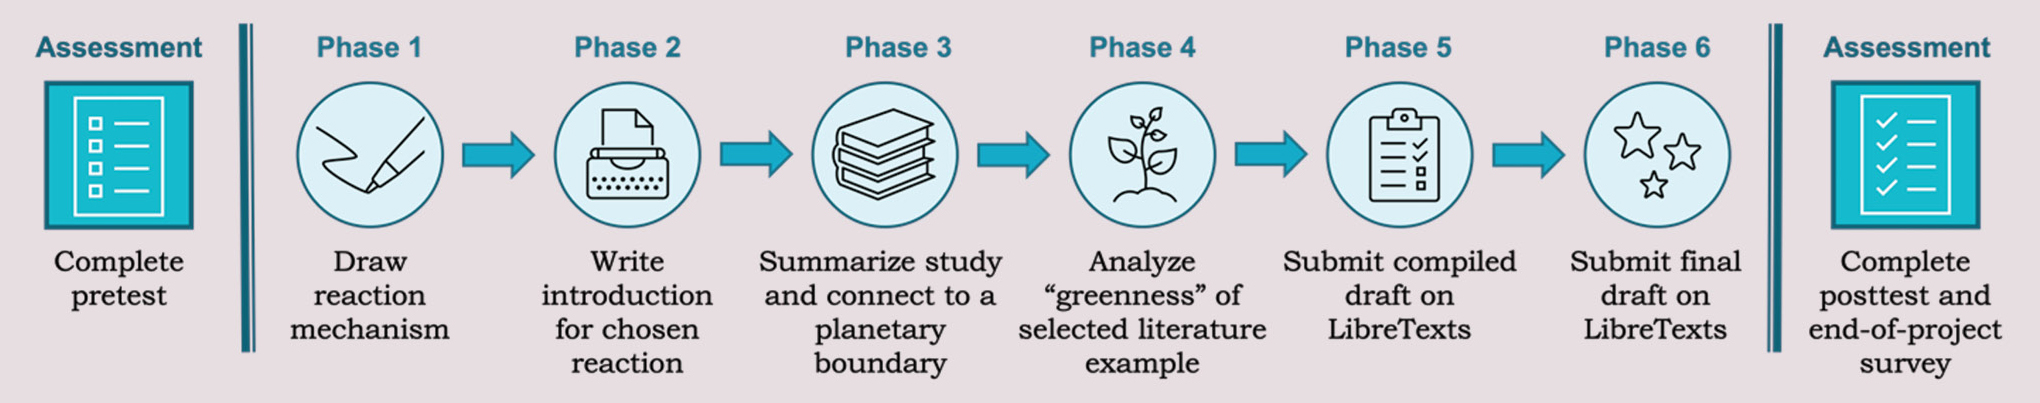 Phases of the OER project.